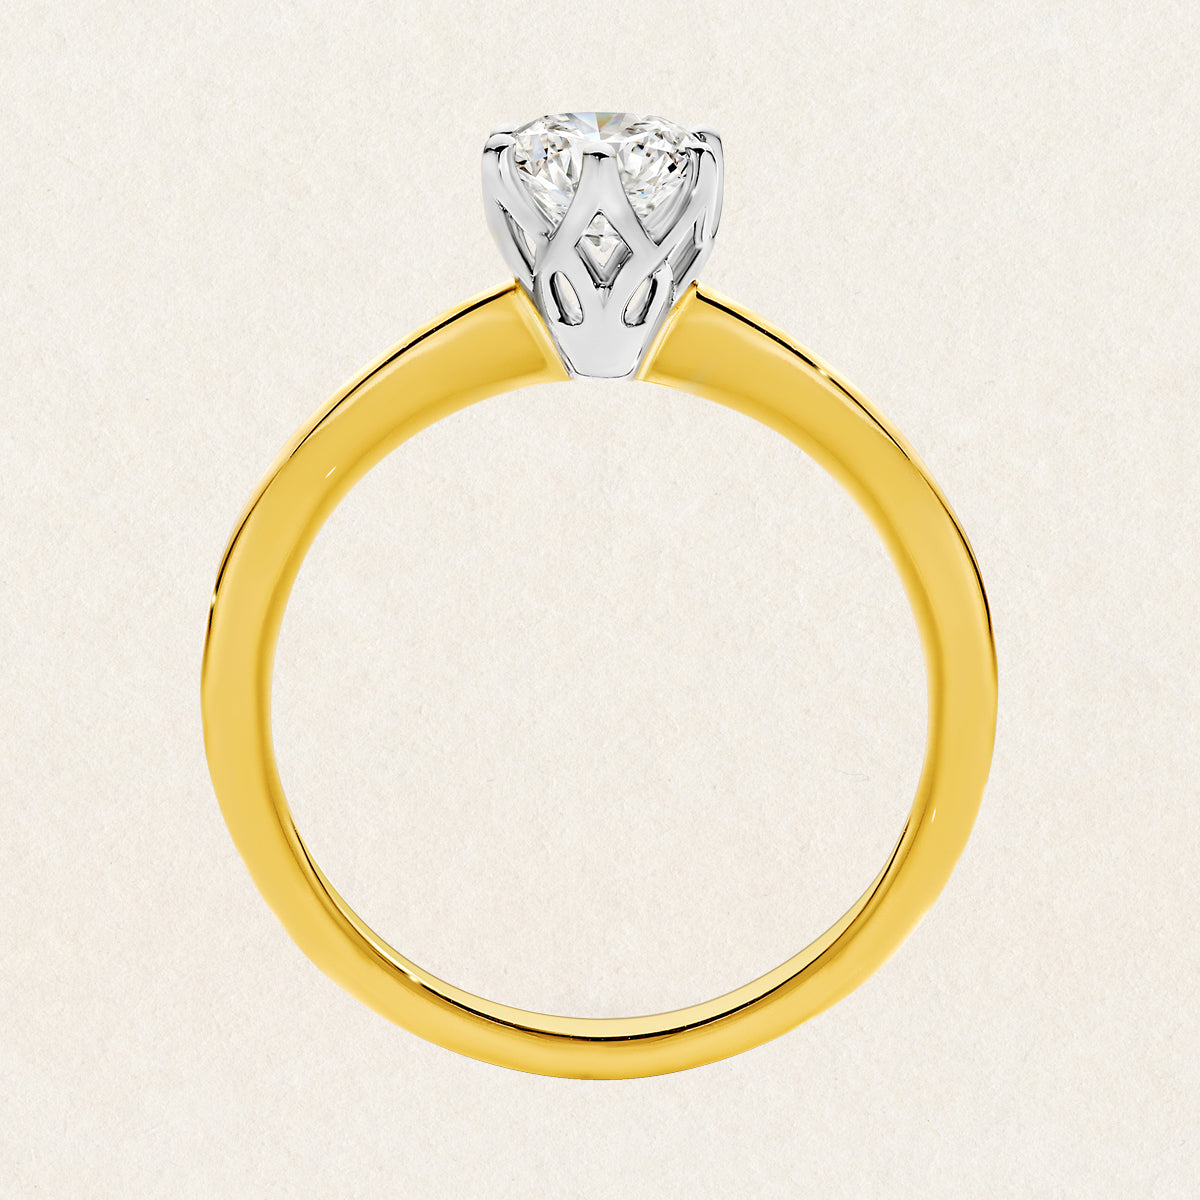 0.75ct lab grown diamond solitaire ring with 18k yellow and white gold